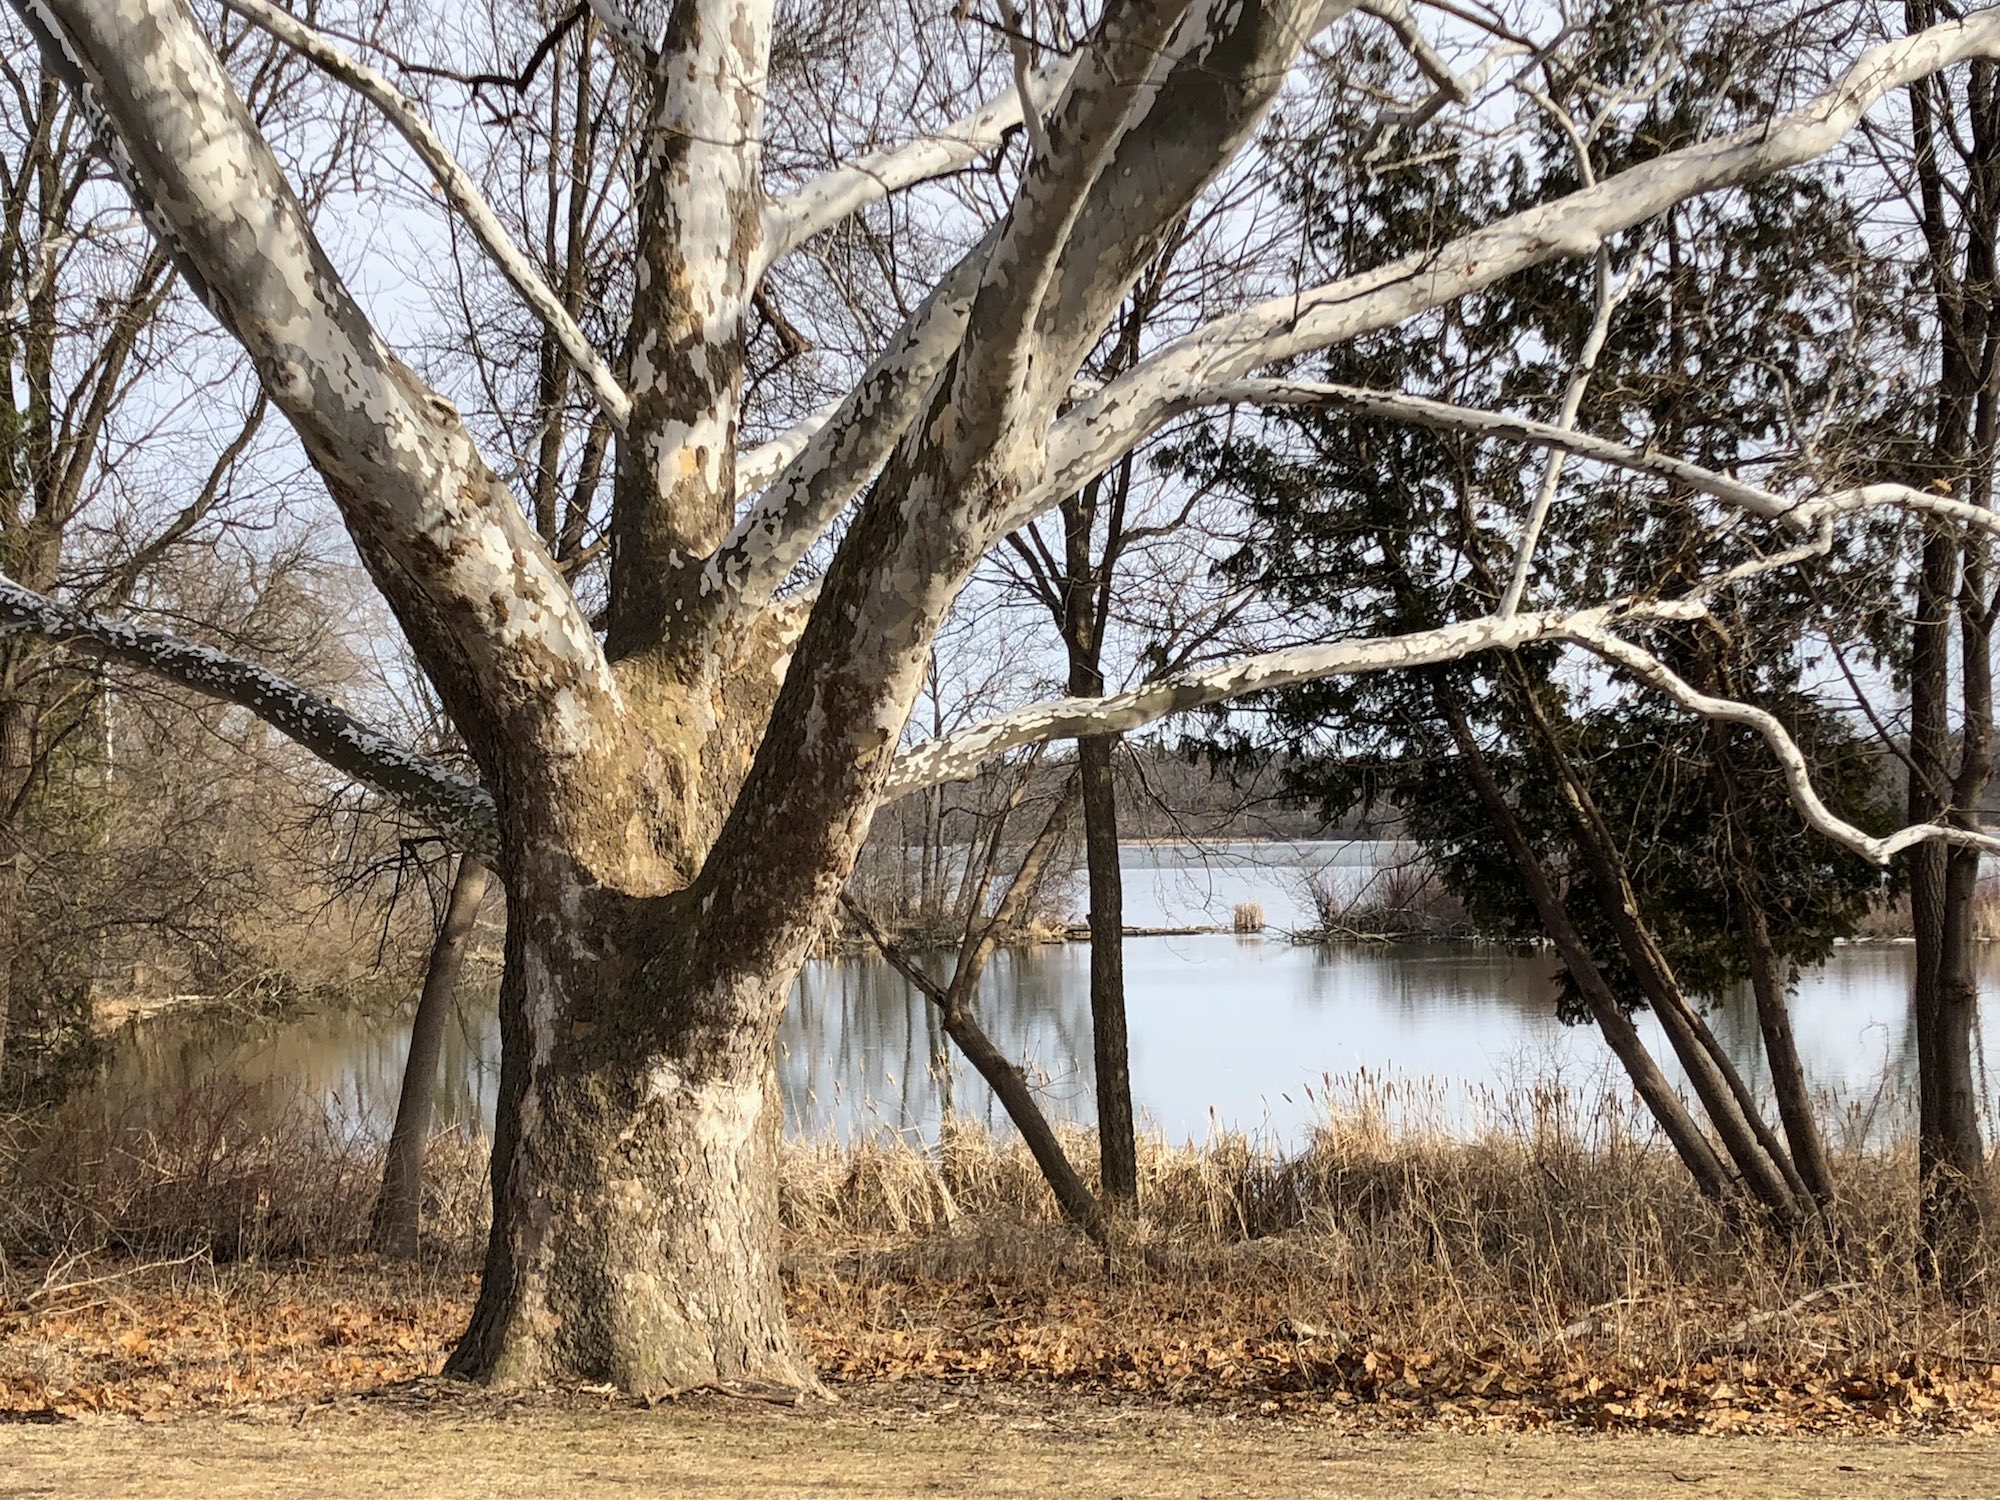 Sycamore tree between Ho-Nee-Um Pond and Arbor Drive on north shore of Lake Wingra on March 20, 2018.